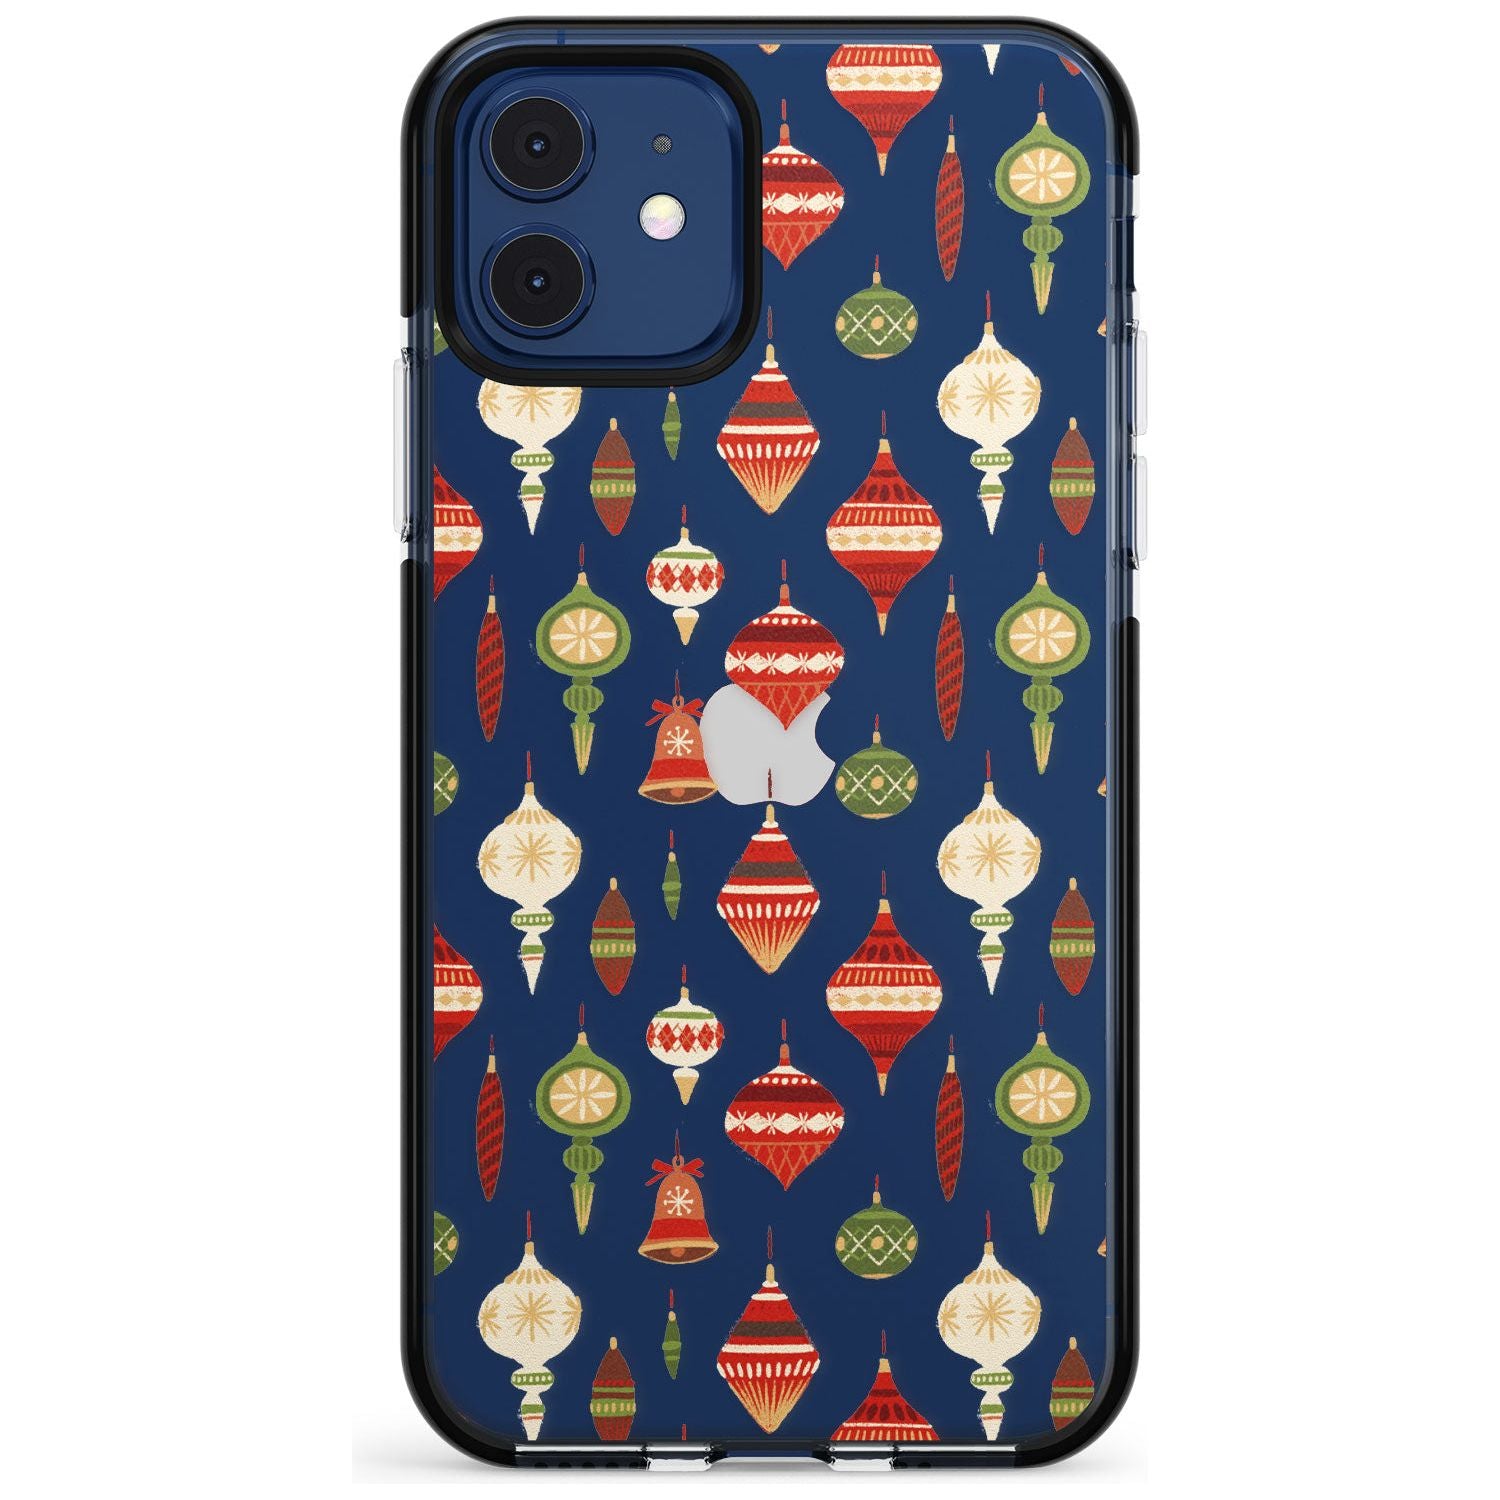 Christmas Baubles Pattern Black Impact Phone Case for iPhone 11 Pro Max